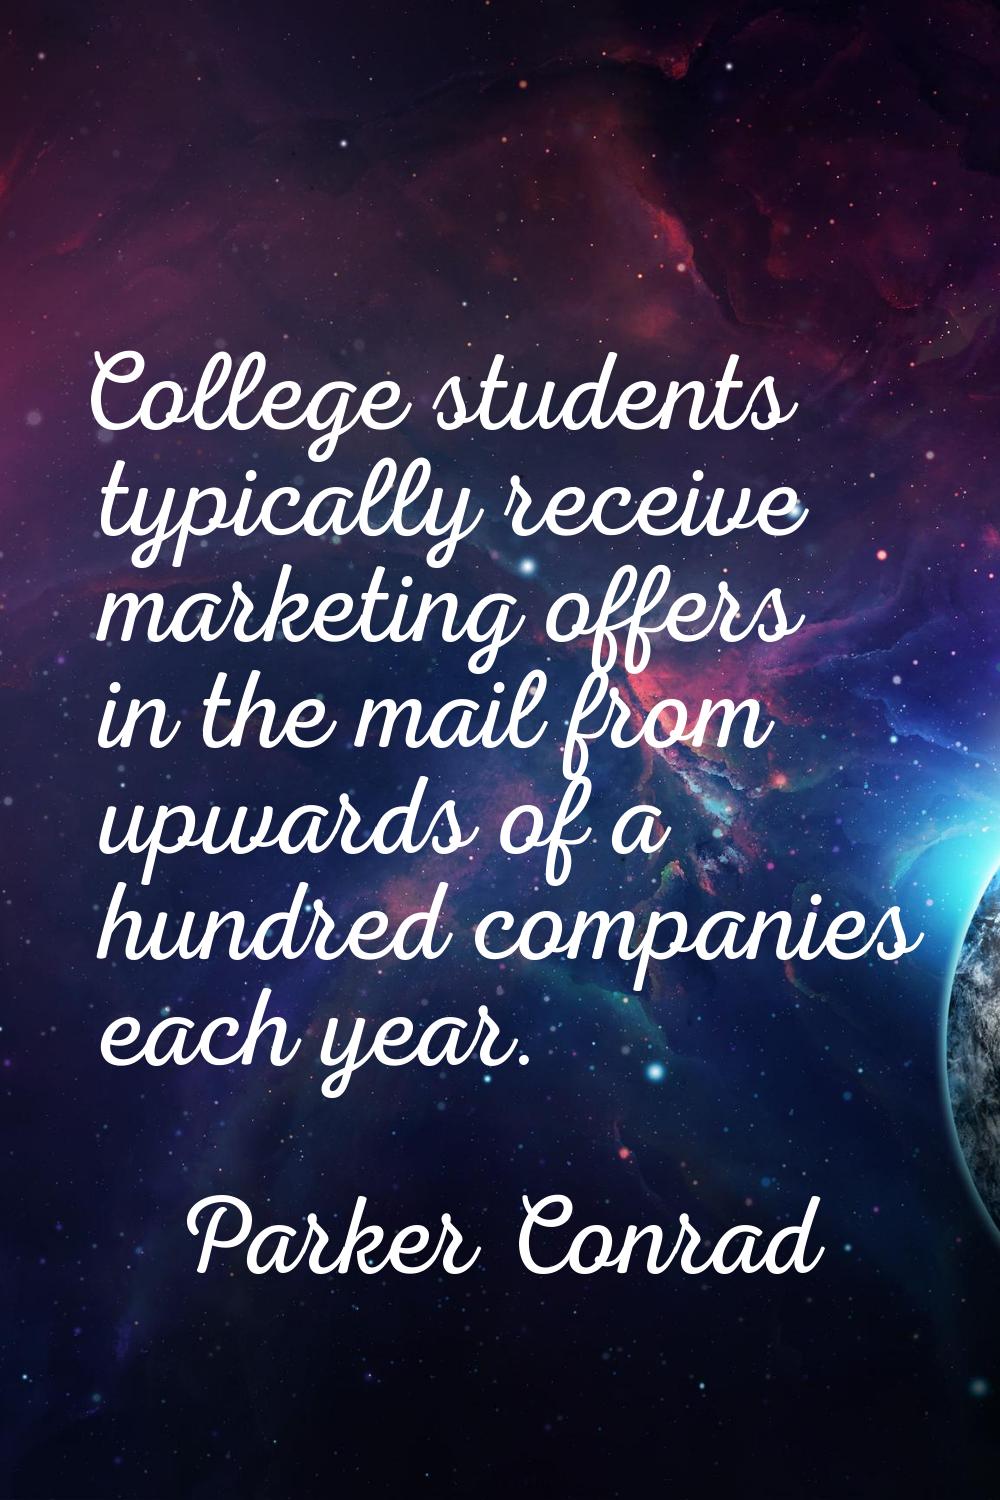 College students typically receive marketing offers in the mail from upwards of a hundred companies